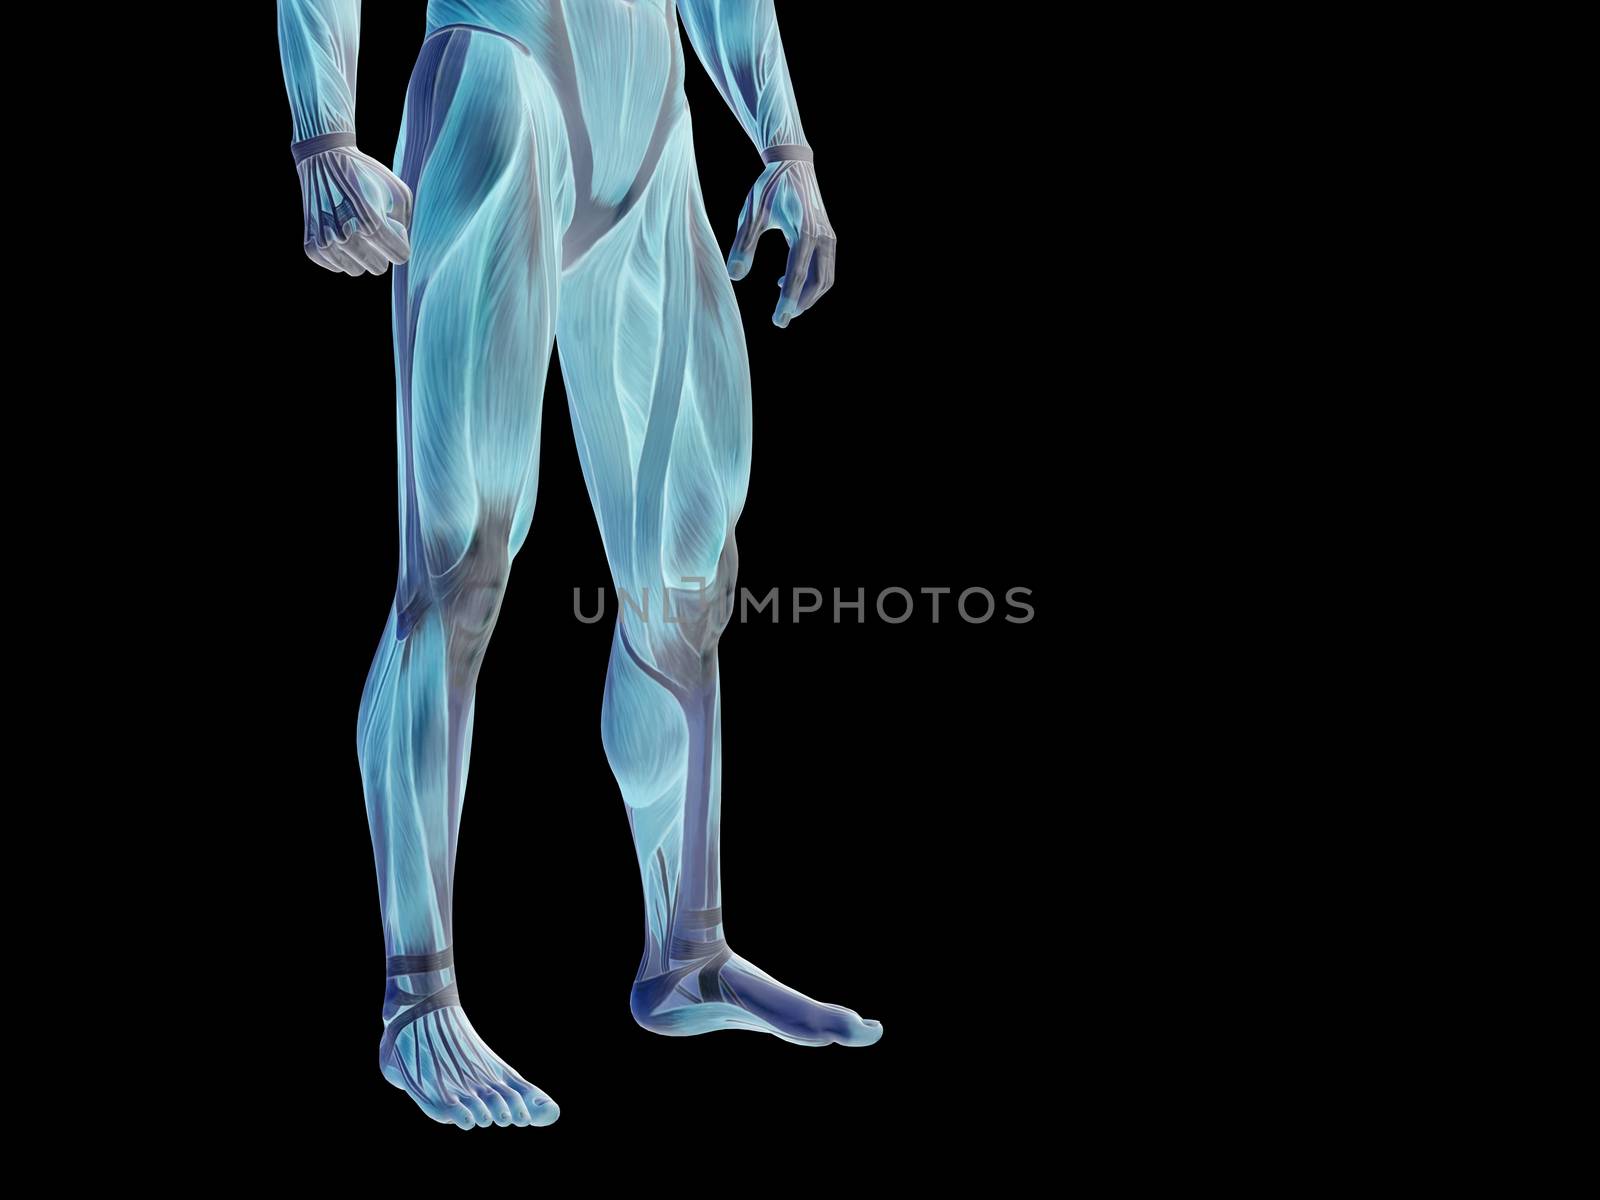 Conceptual human body anatomy isolated on black background